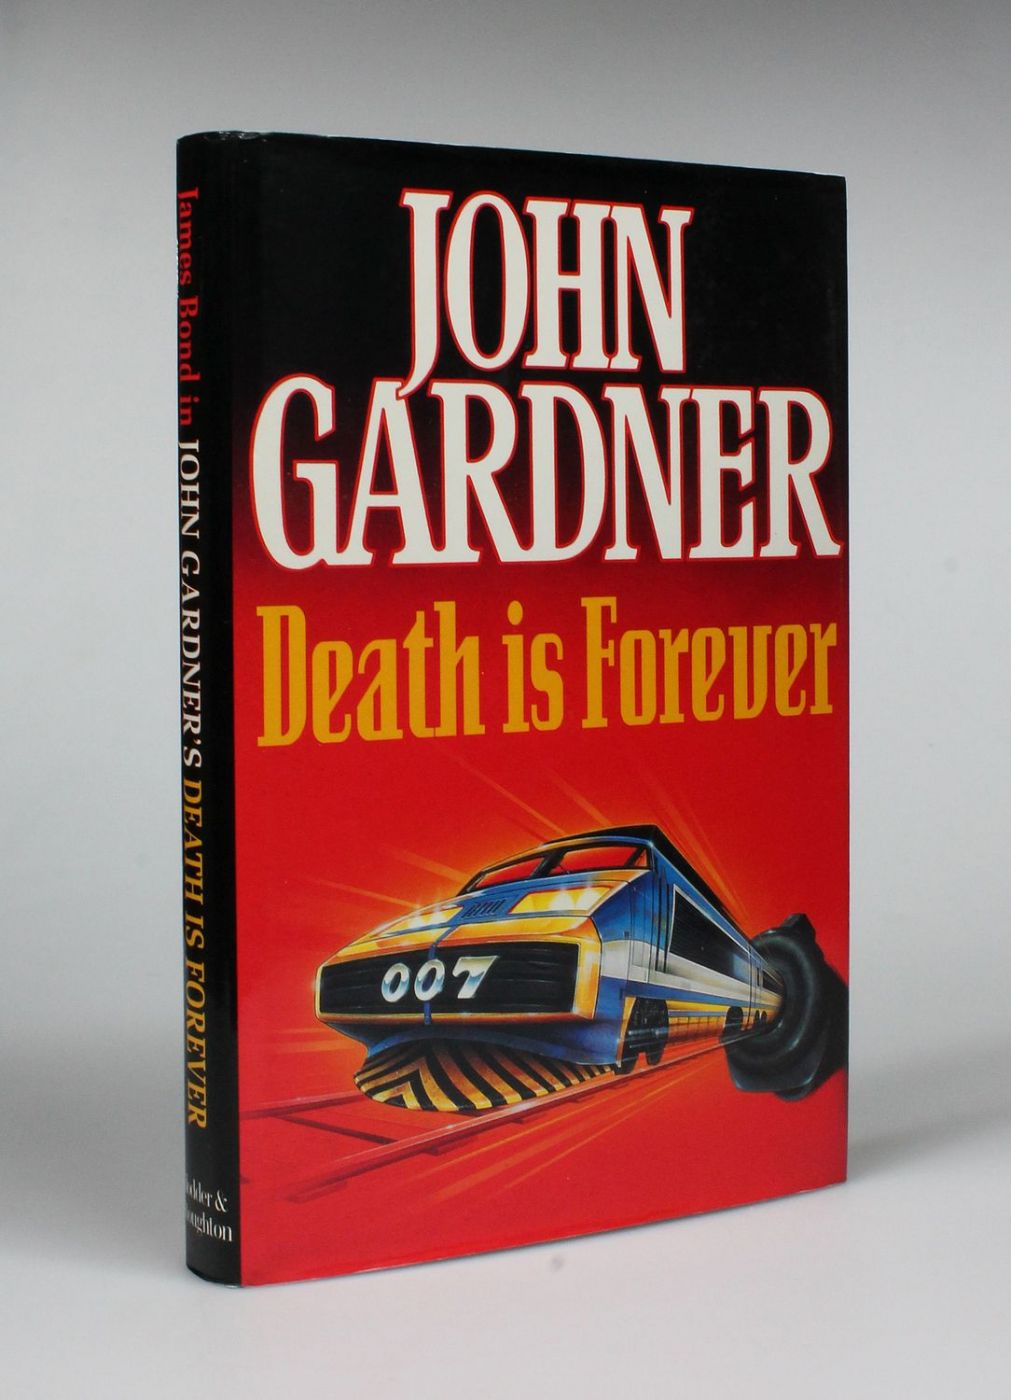 DEATH IS FOREVER -  image 1